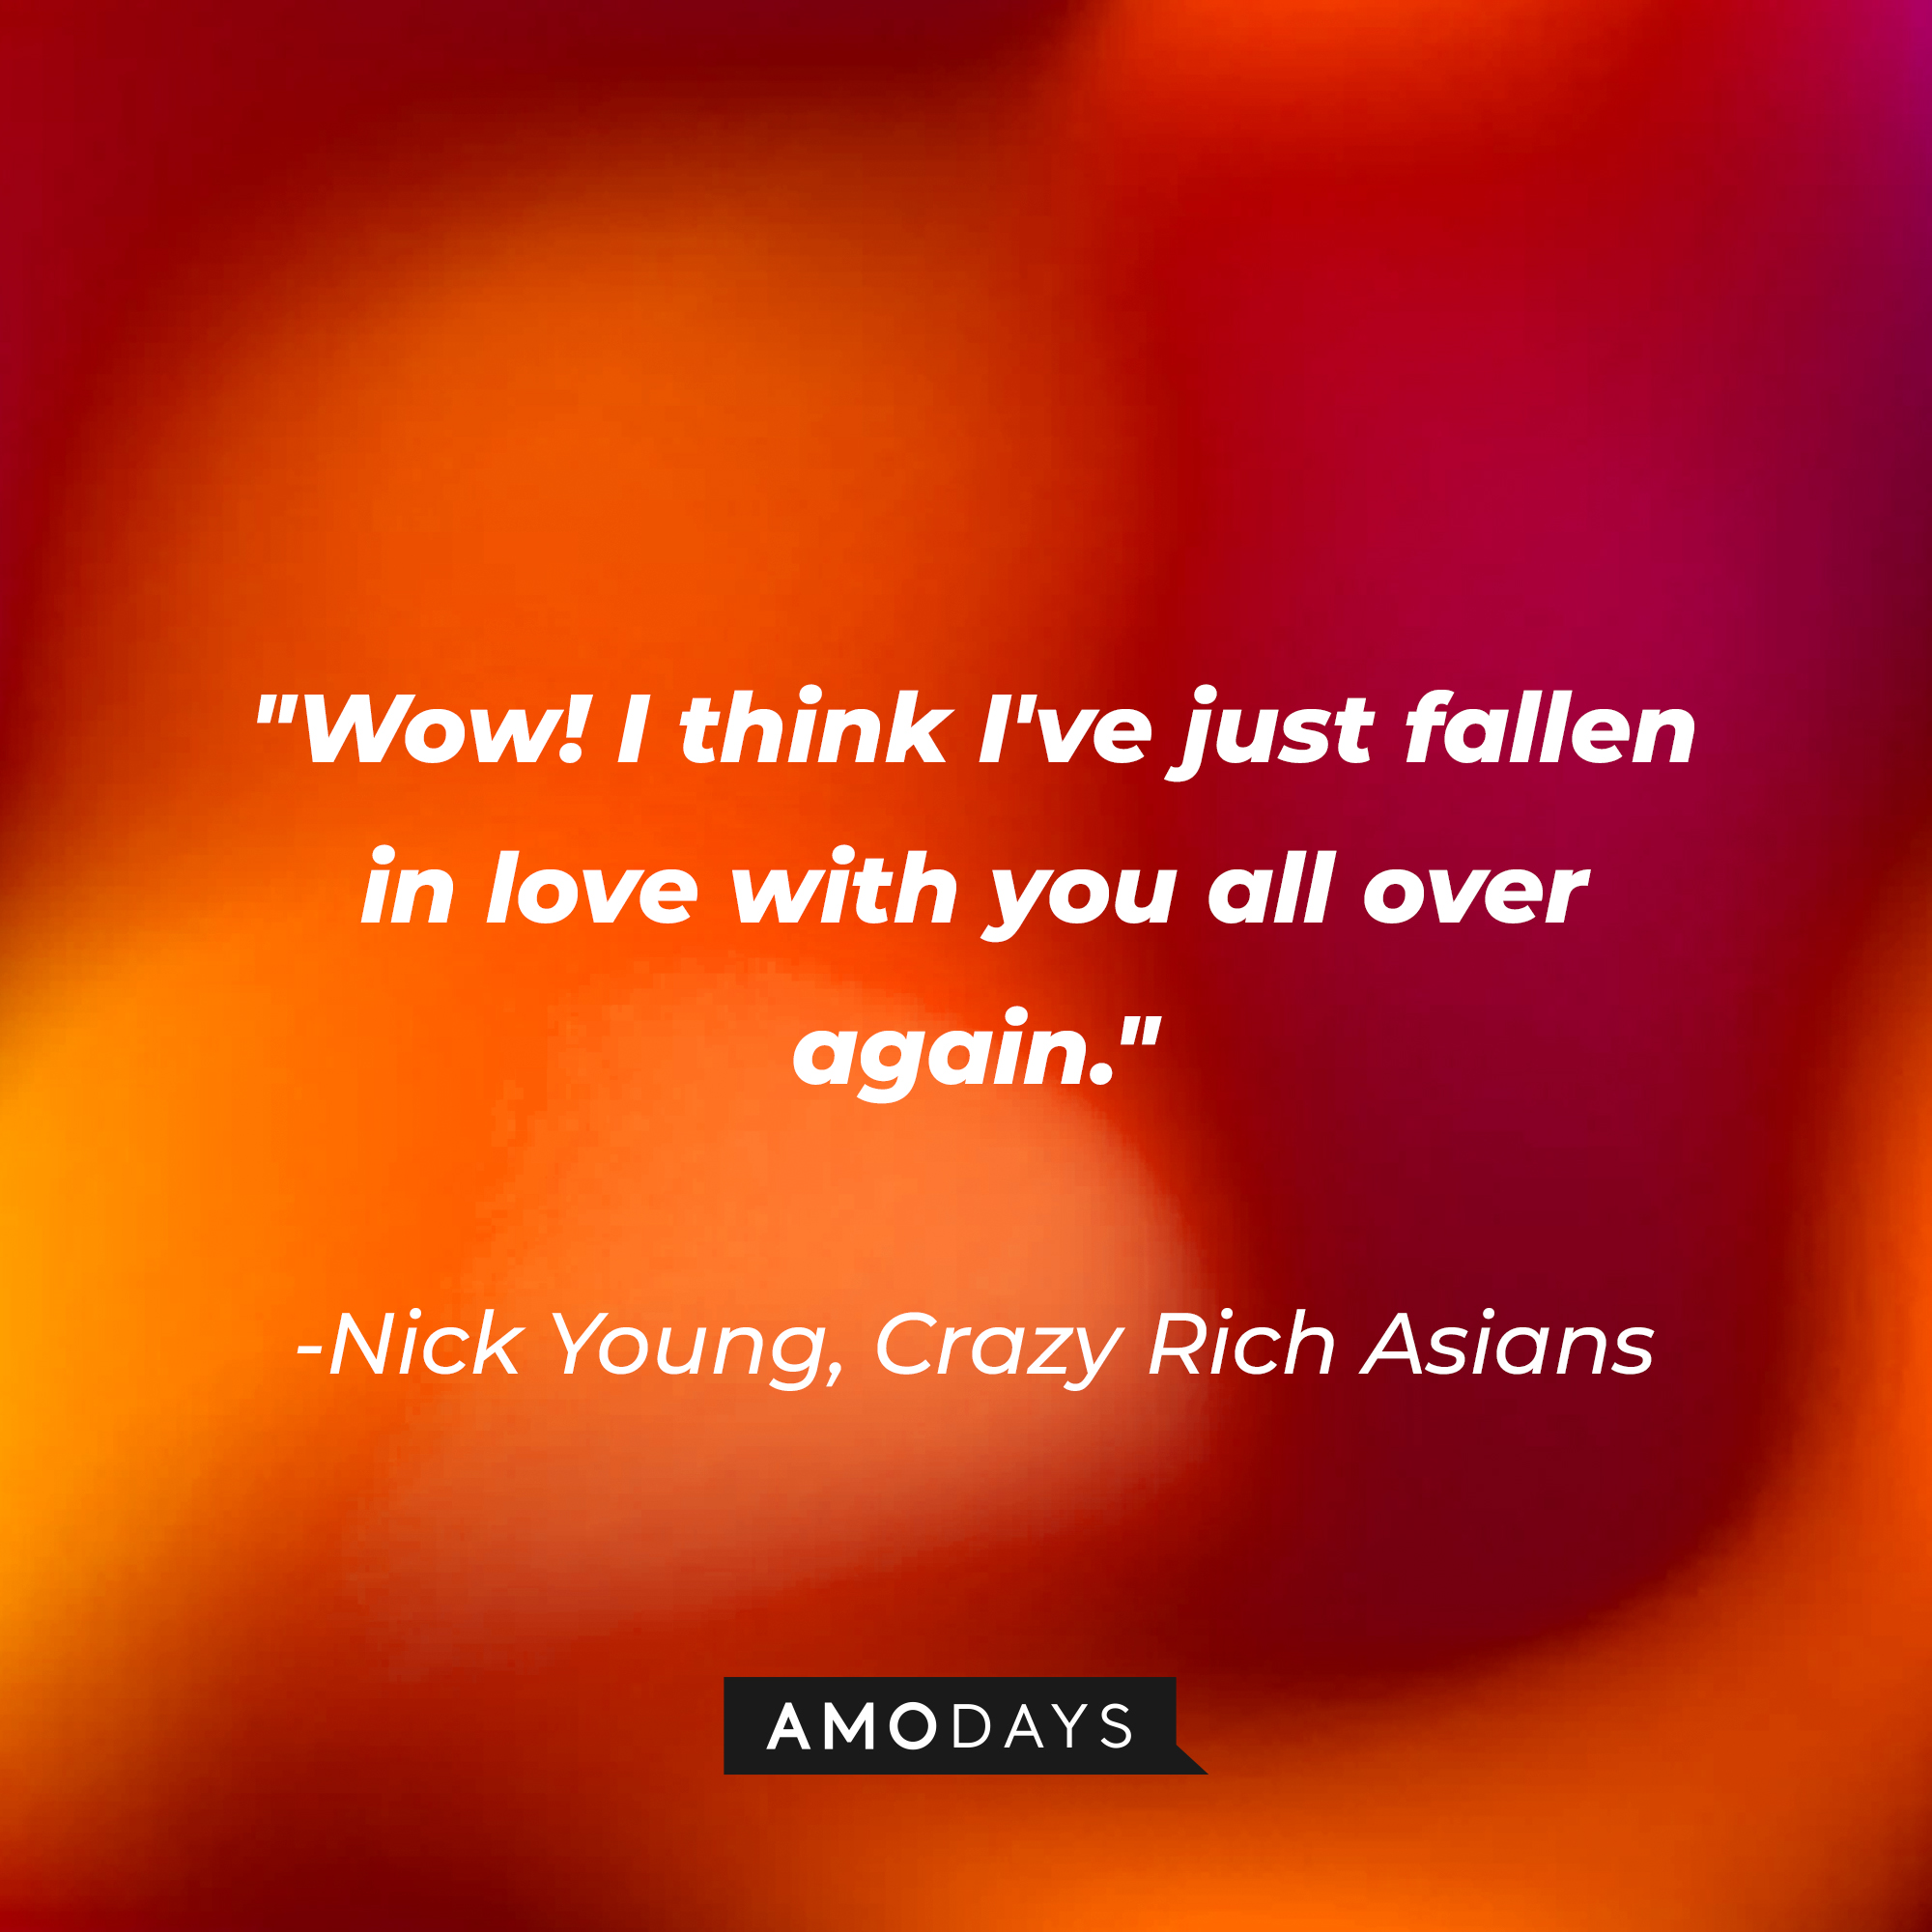 Nick Young's quote: "Wow I think I've just fallen in love with you all over again." | Source: AmoDays